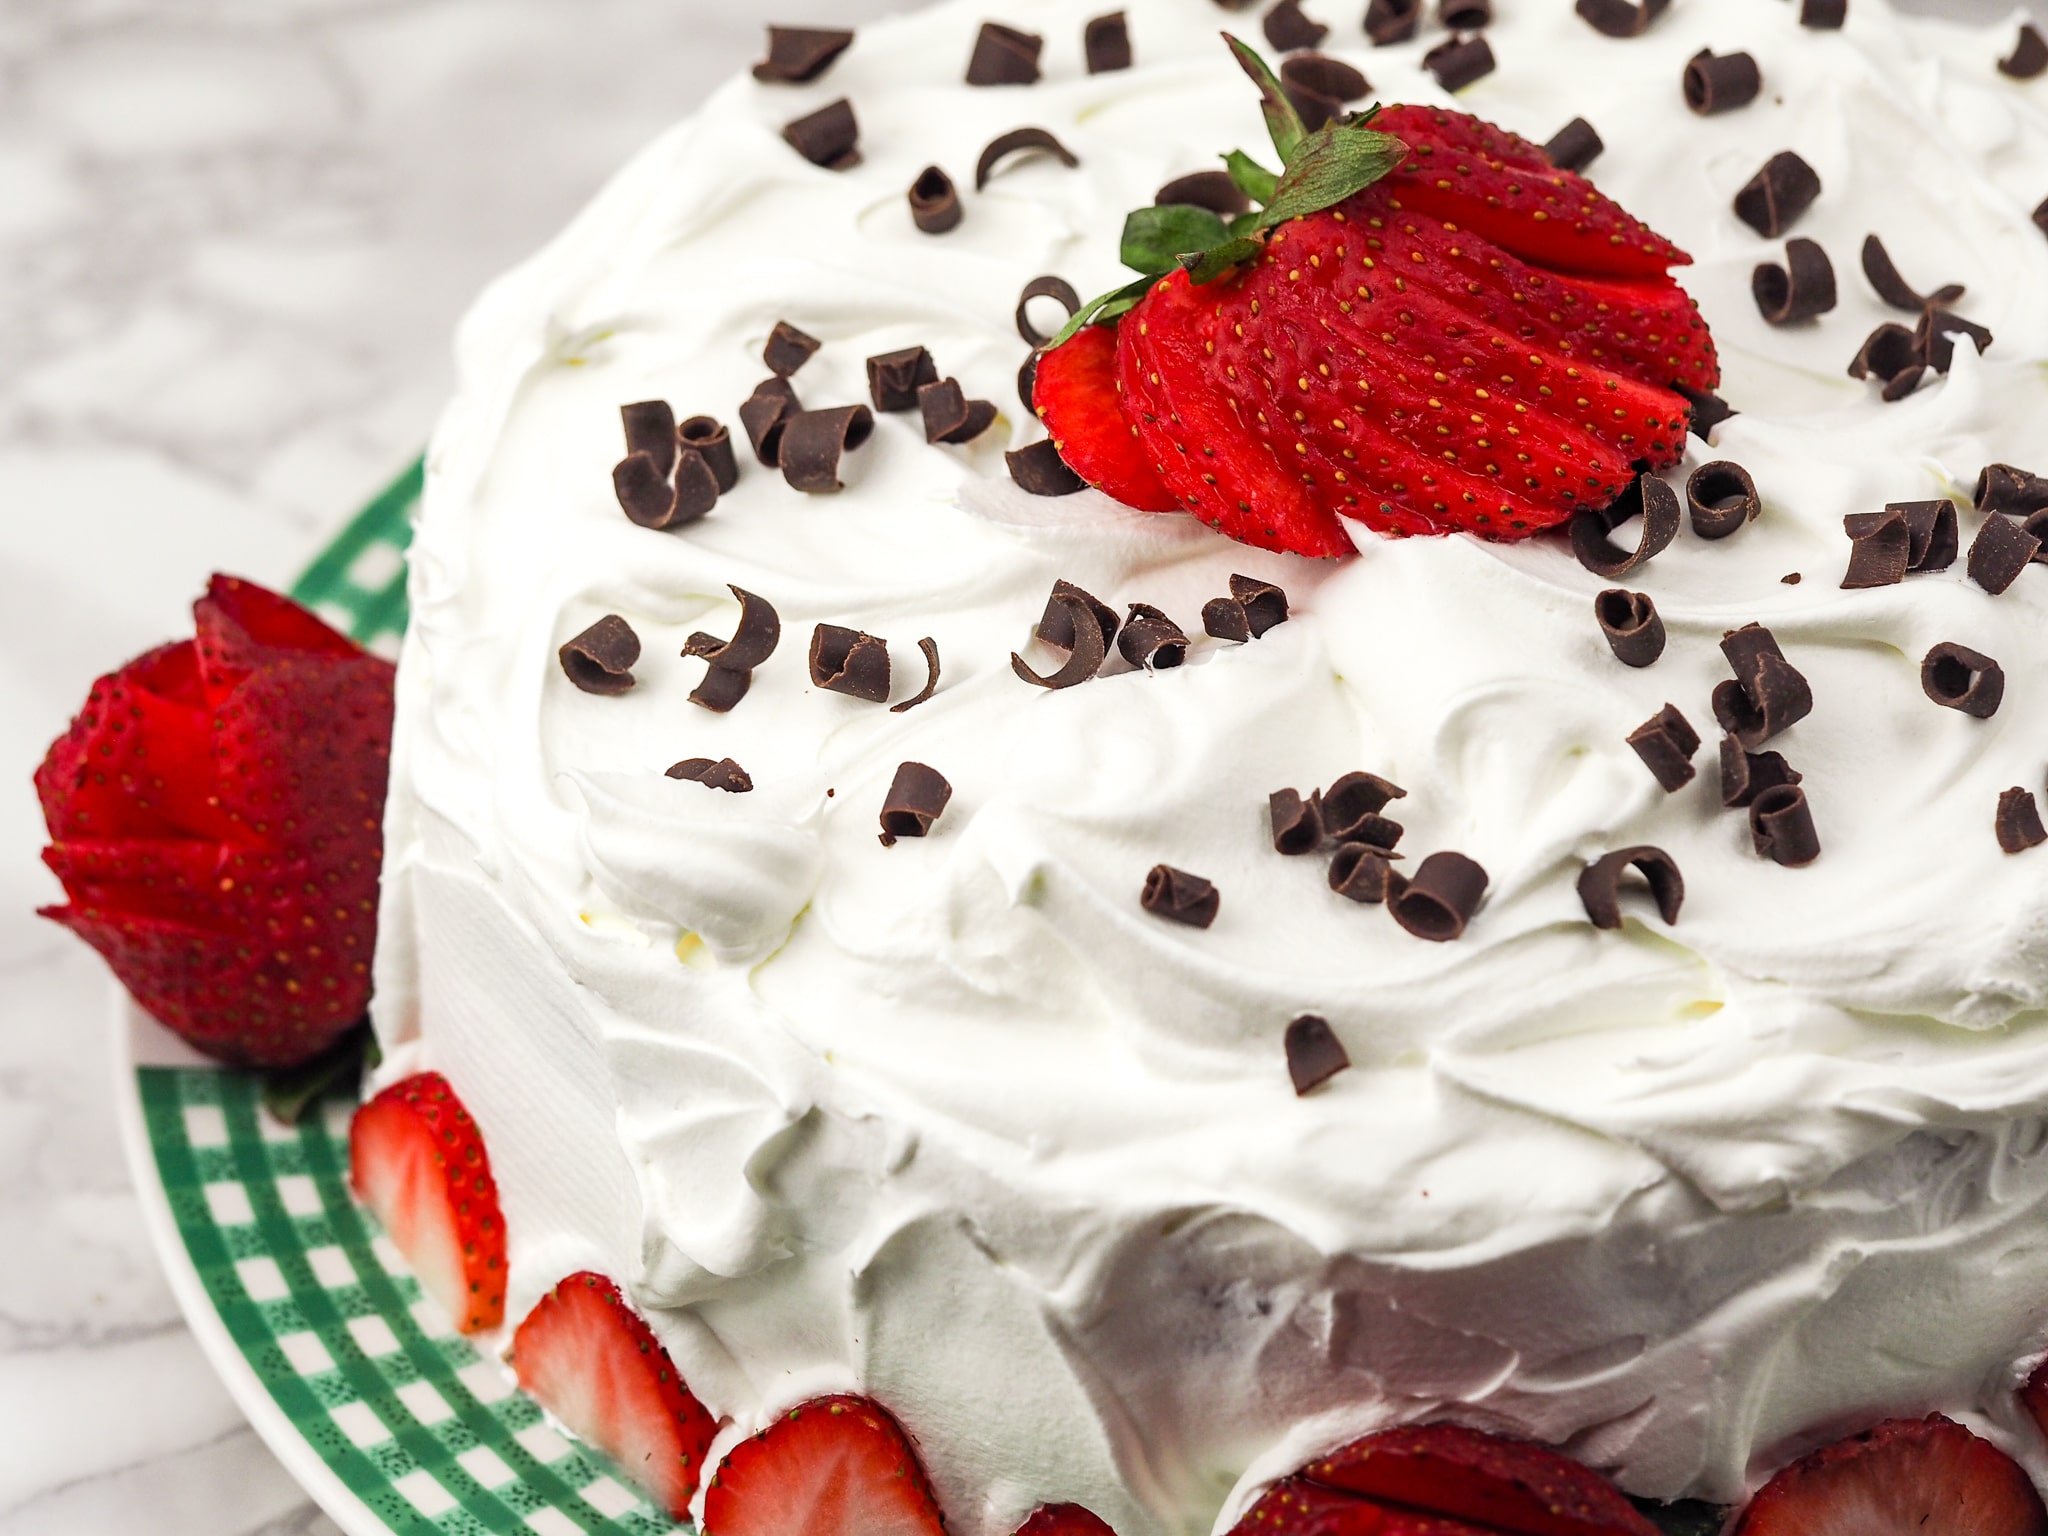 picture of cake offset to right with whipped topping, chocolate curls, and sliced strawberries shaped like roses as accents